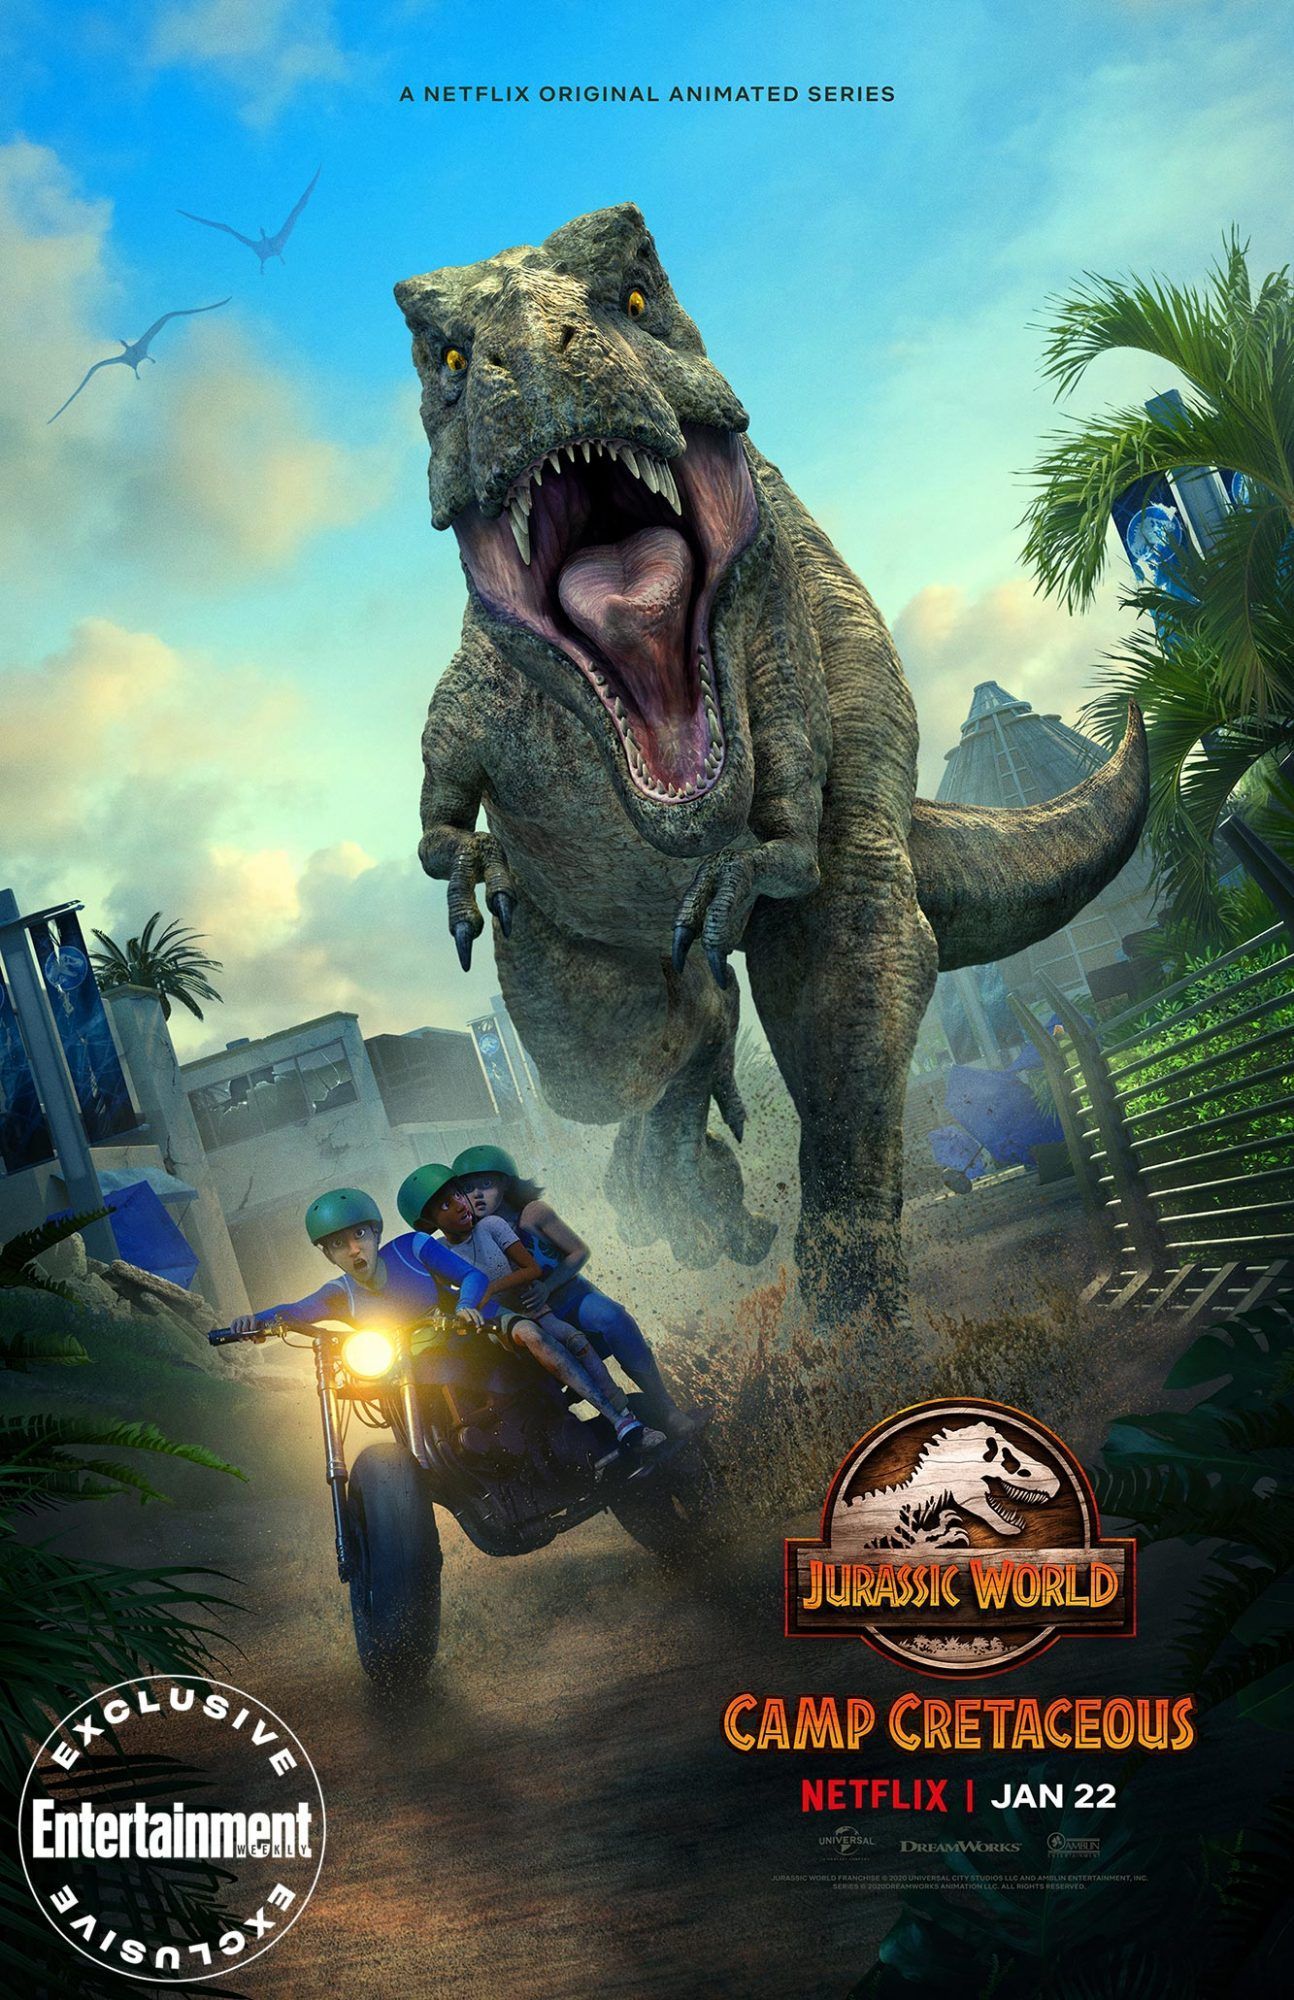 Exclusive: 'Jurassic World: Camp Cretaceous' season 2 sets January premiere with new trailer. Jurassic world wallpaper, Jurassic park world, Jurassic world poster